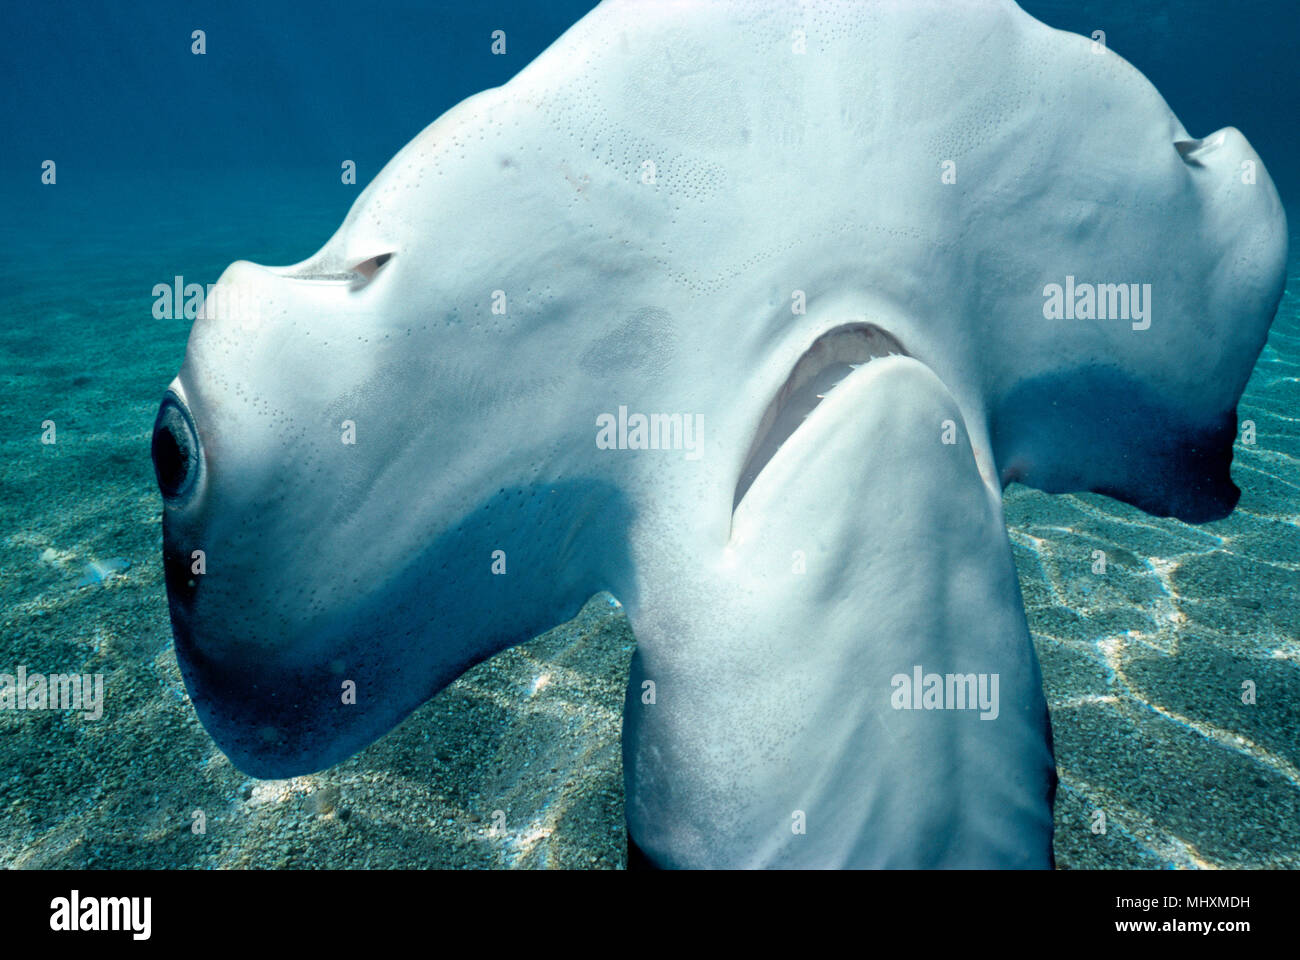 Head and mouth of Juvenile Scalloped Hammerhead Shark (Sphyrna Lewini), Kane'ohe Bay, Hawaii - Pacific Ocean.   This image has been digitally altered  Stock Photo